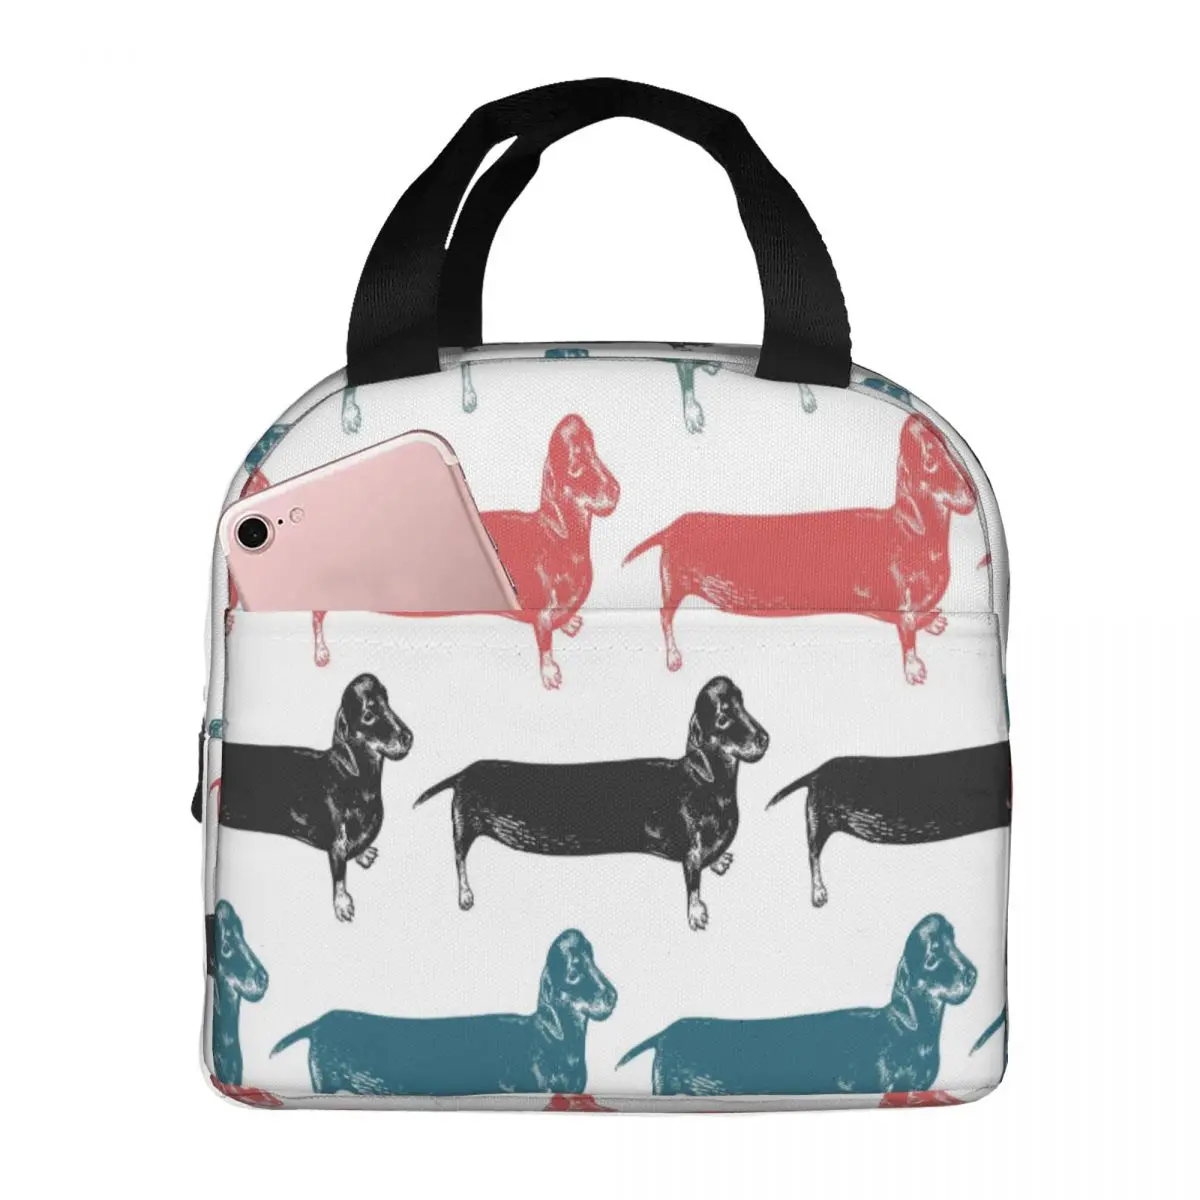 

Dachshunds Long Dogs Cute Puppies Lunch Bag Portable Insulated Thermal Cooler Bento Lunch Box Tote Picnic Storage Bag Pouch